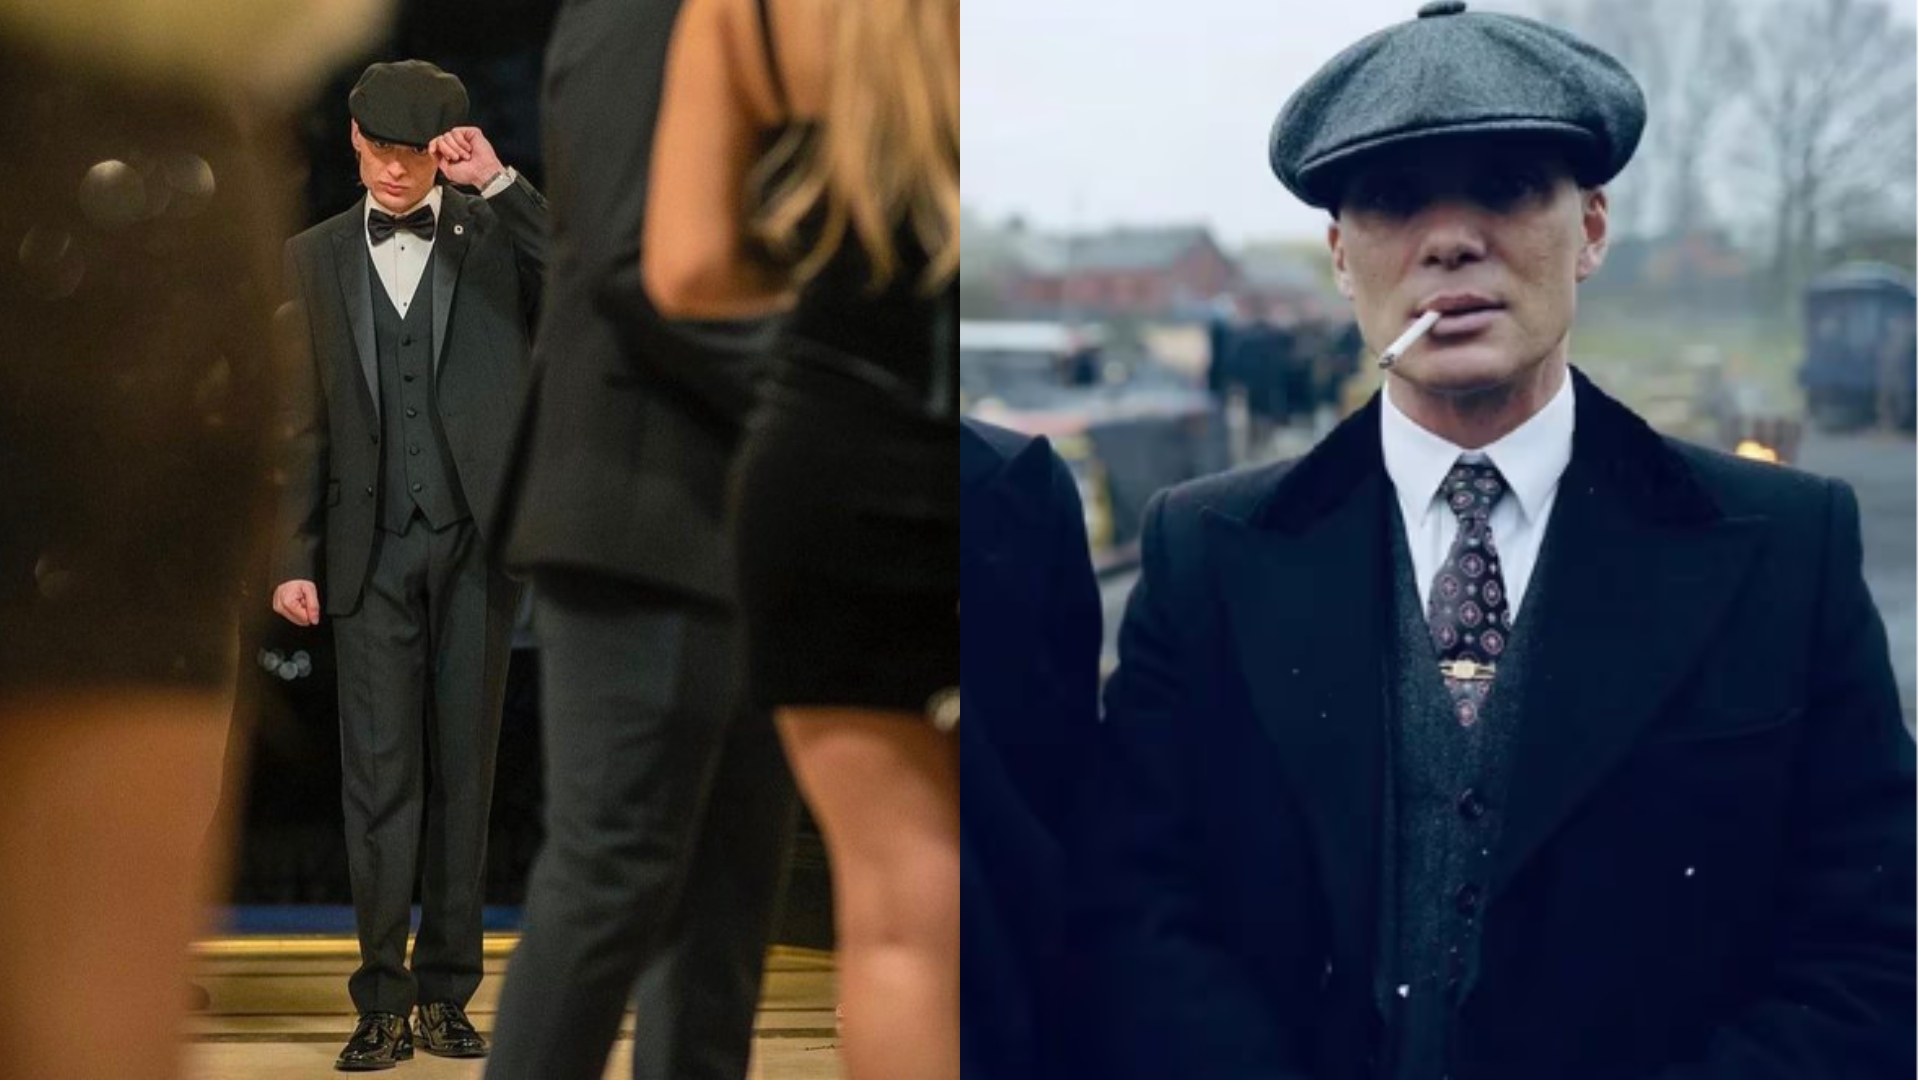 Internet users compared the artist with Peaky Blinders (TW elpesopluma / Netflix)